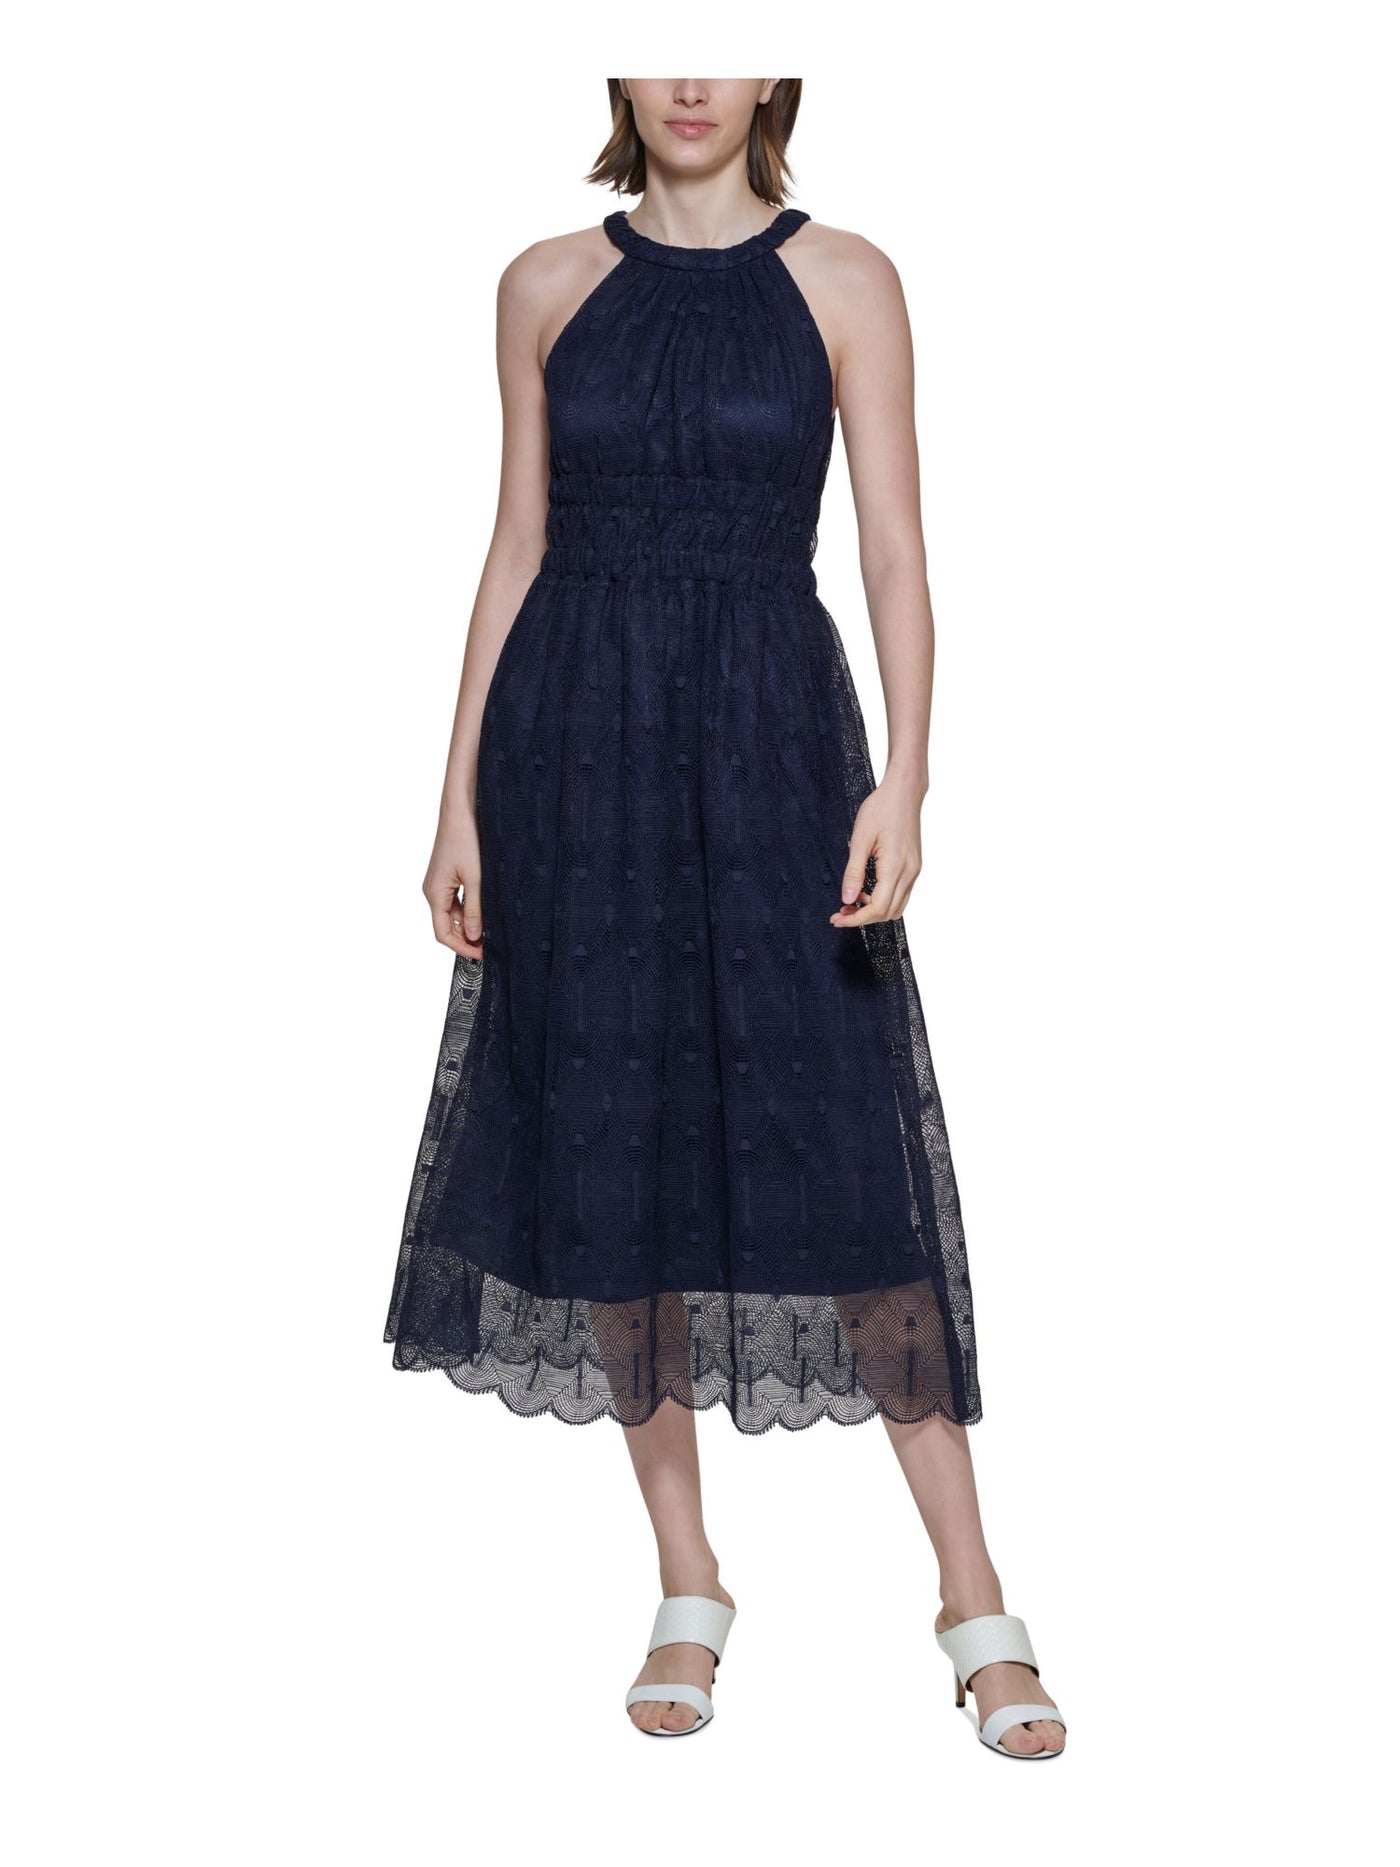 CALVIN KLEIN Womens Navy Zippered Textured Lace Lined Smocked Scalloped Sleeveless Halter Tea-Length Fit + Flare Dress 6